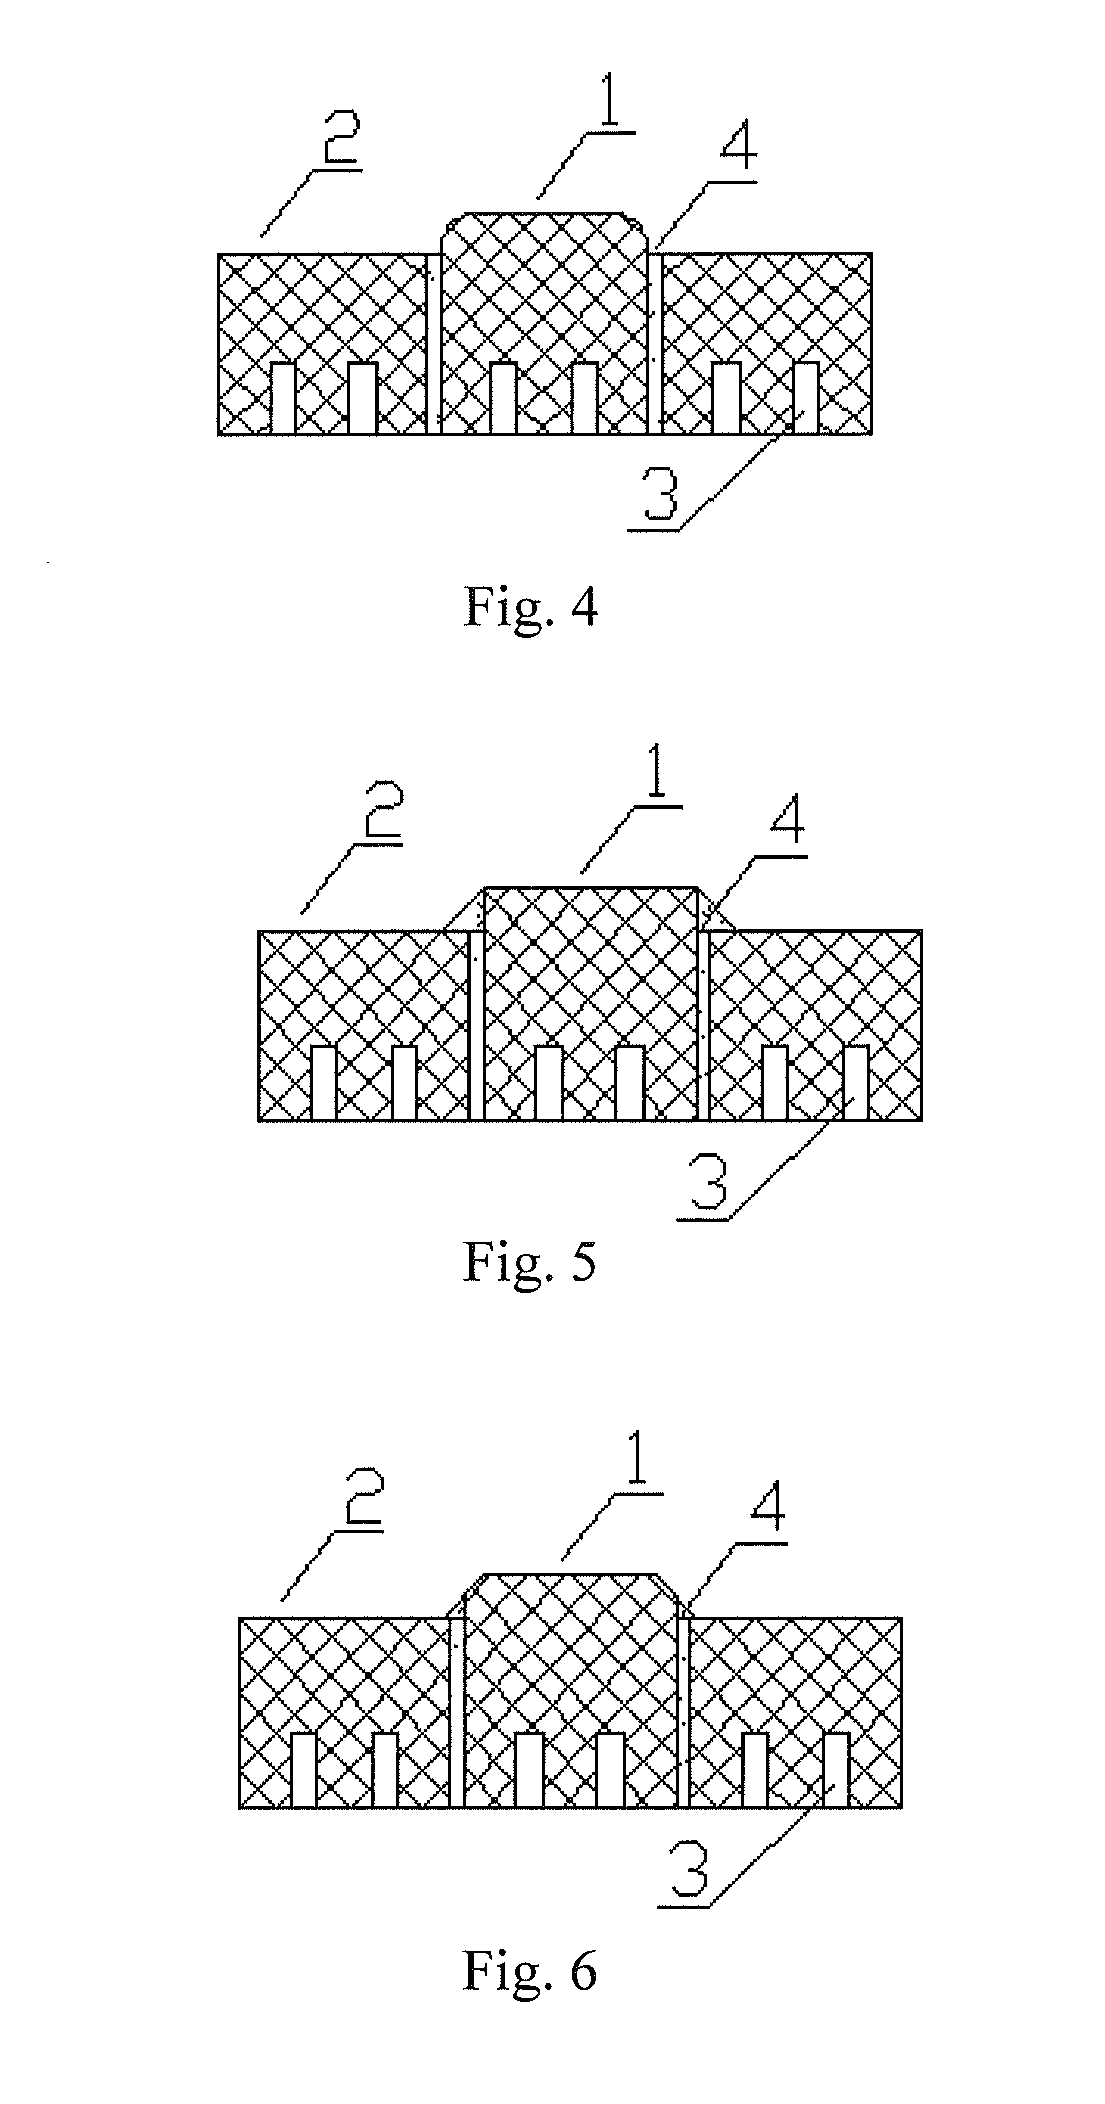 Method of Configuring Cathodes of an Aluminum Reduction Cell